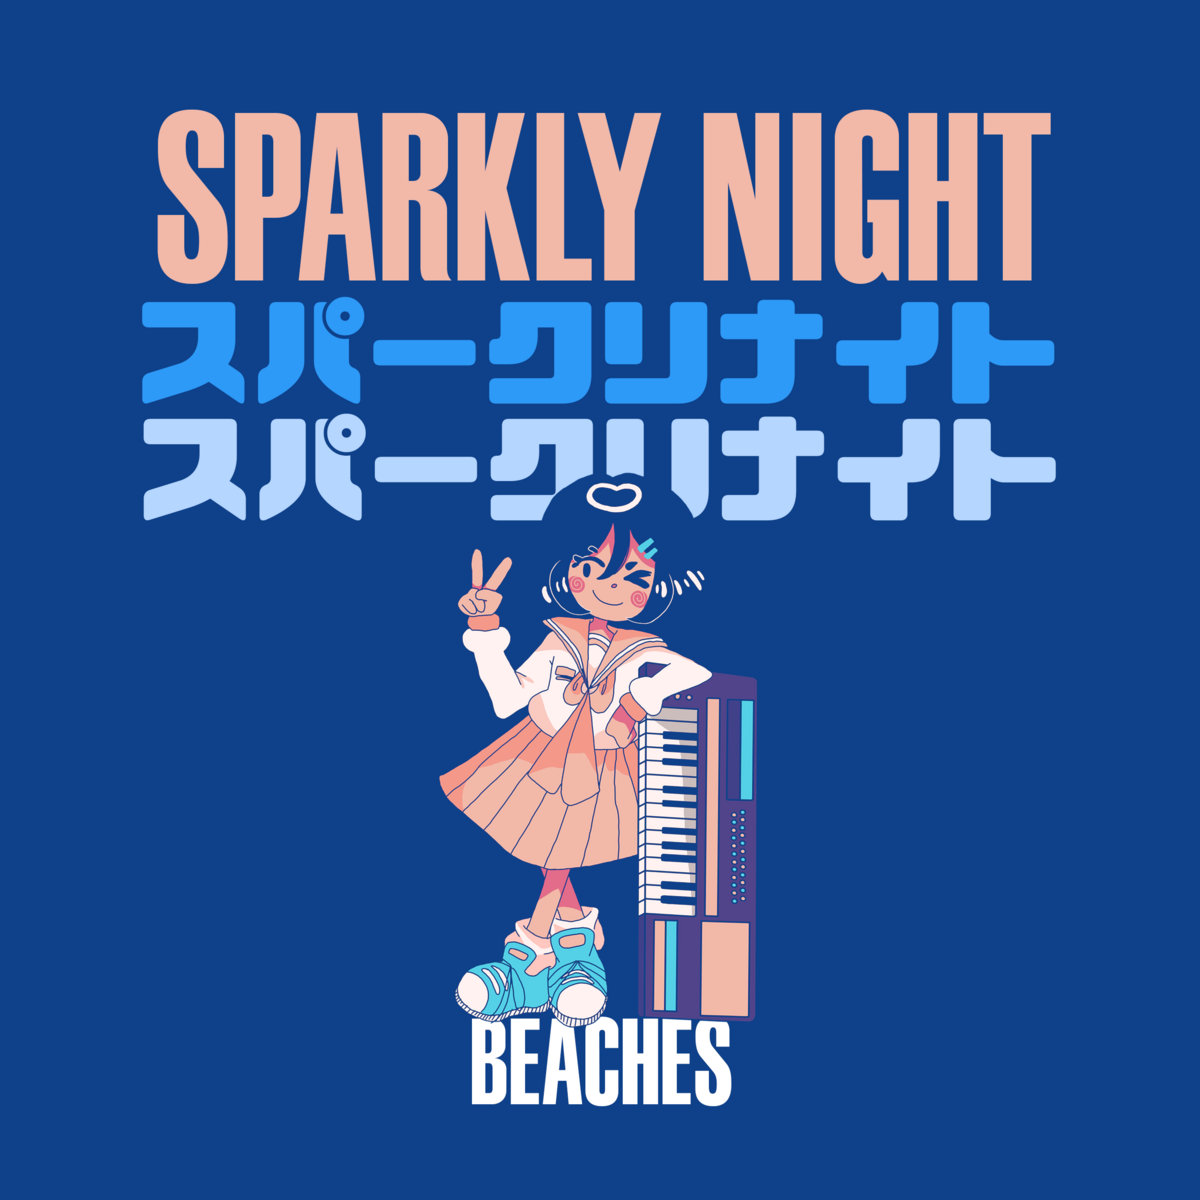 Beaches by Sparkly Night